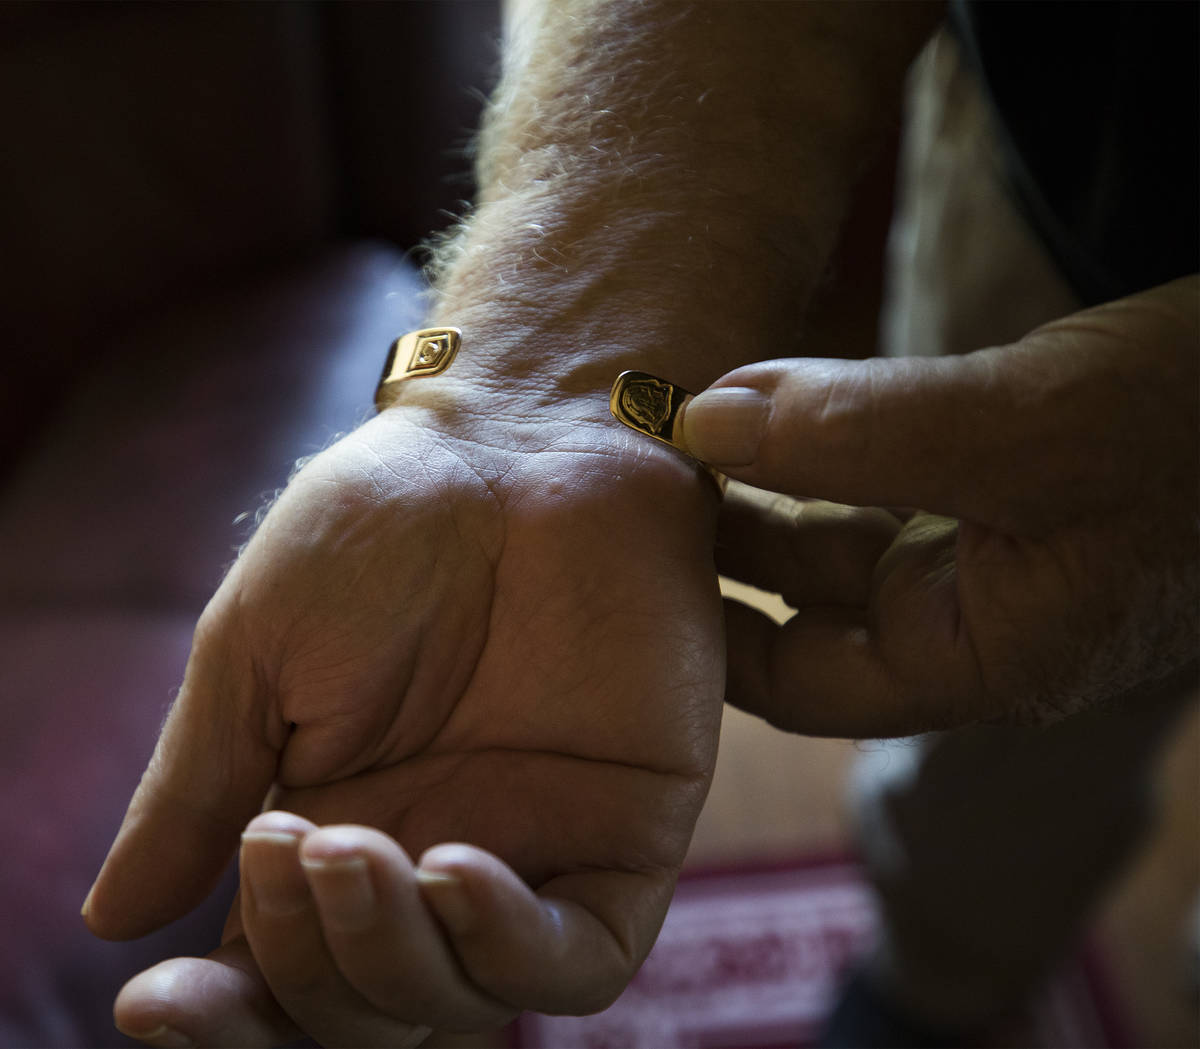 James “Bo” Gritz, a former U.S. Army Special Forces officer, shows his POW/MIA bracelet at ...